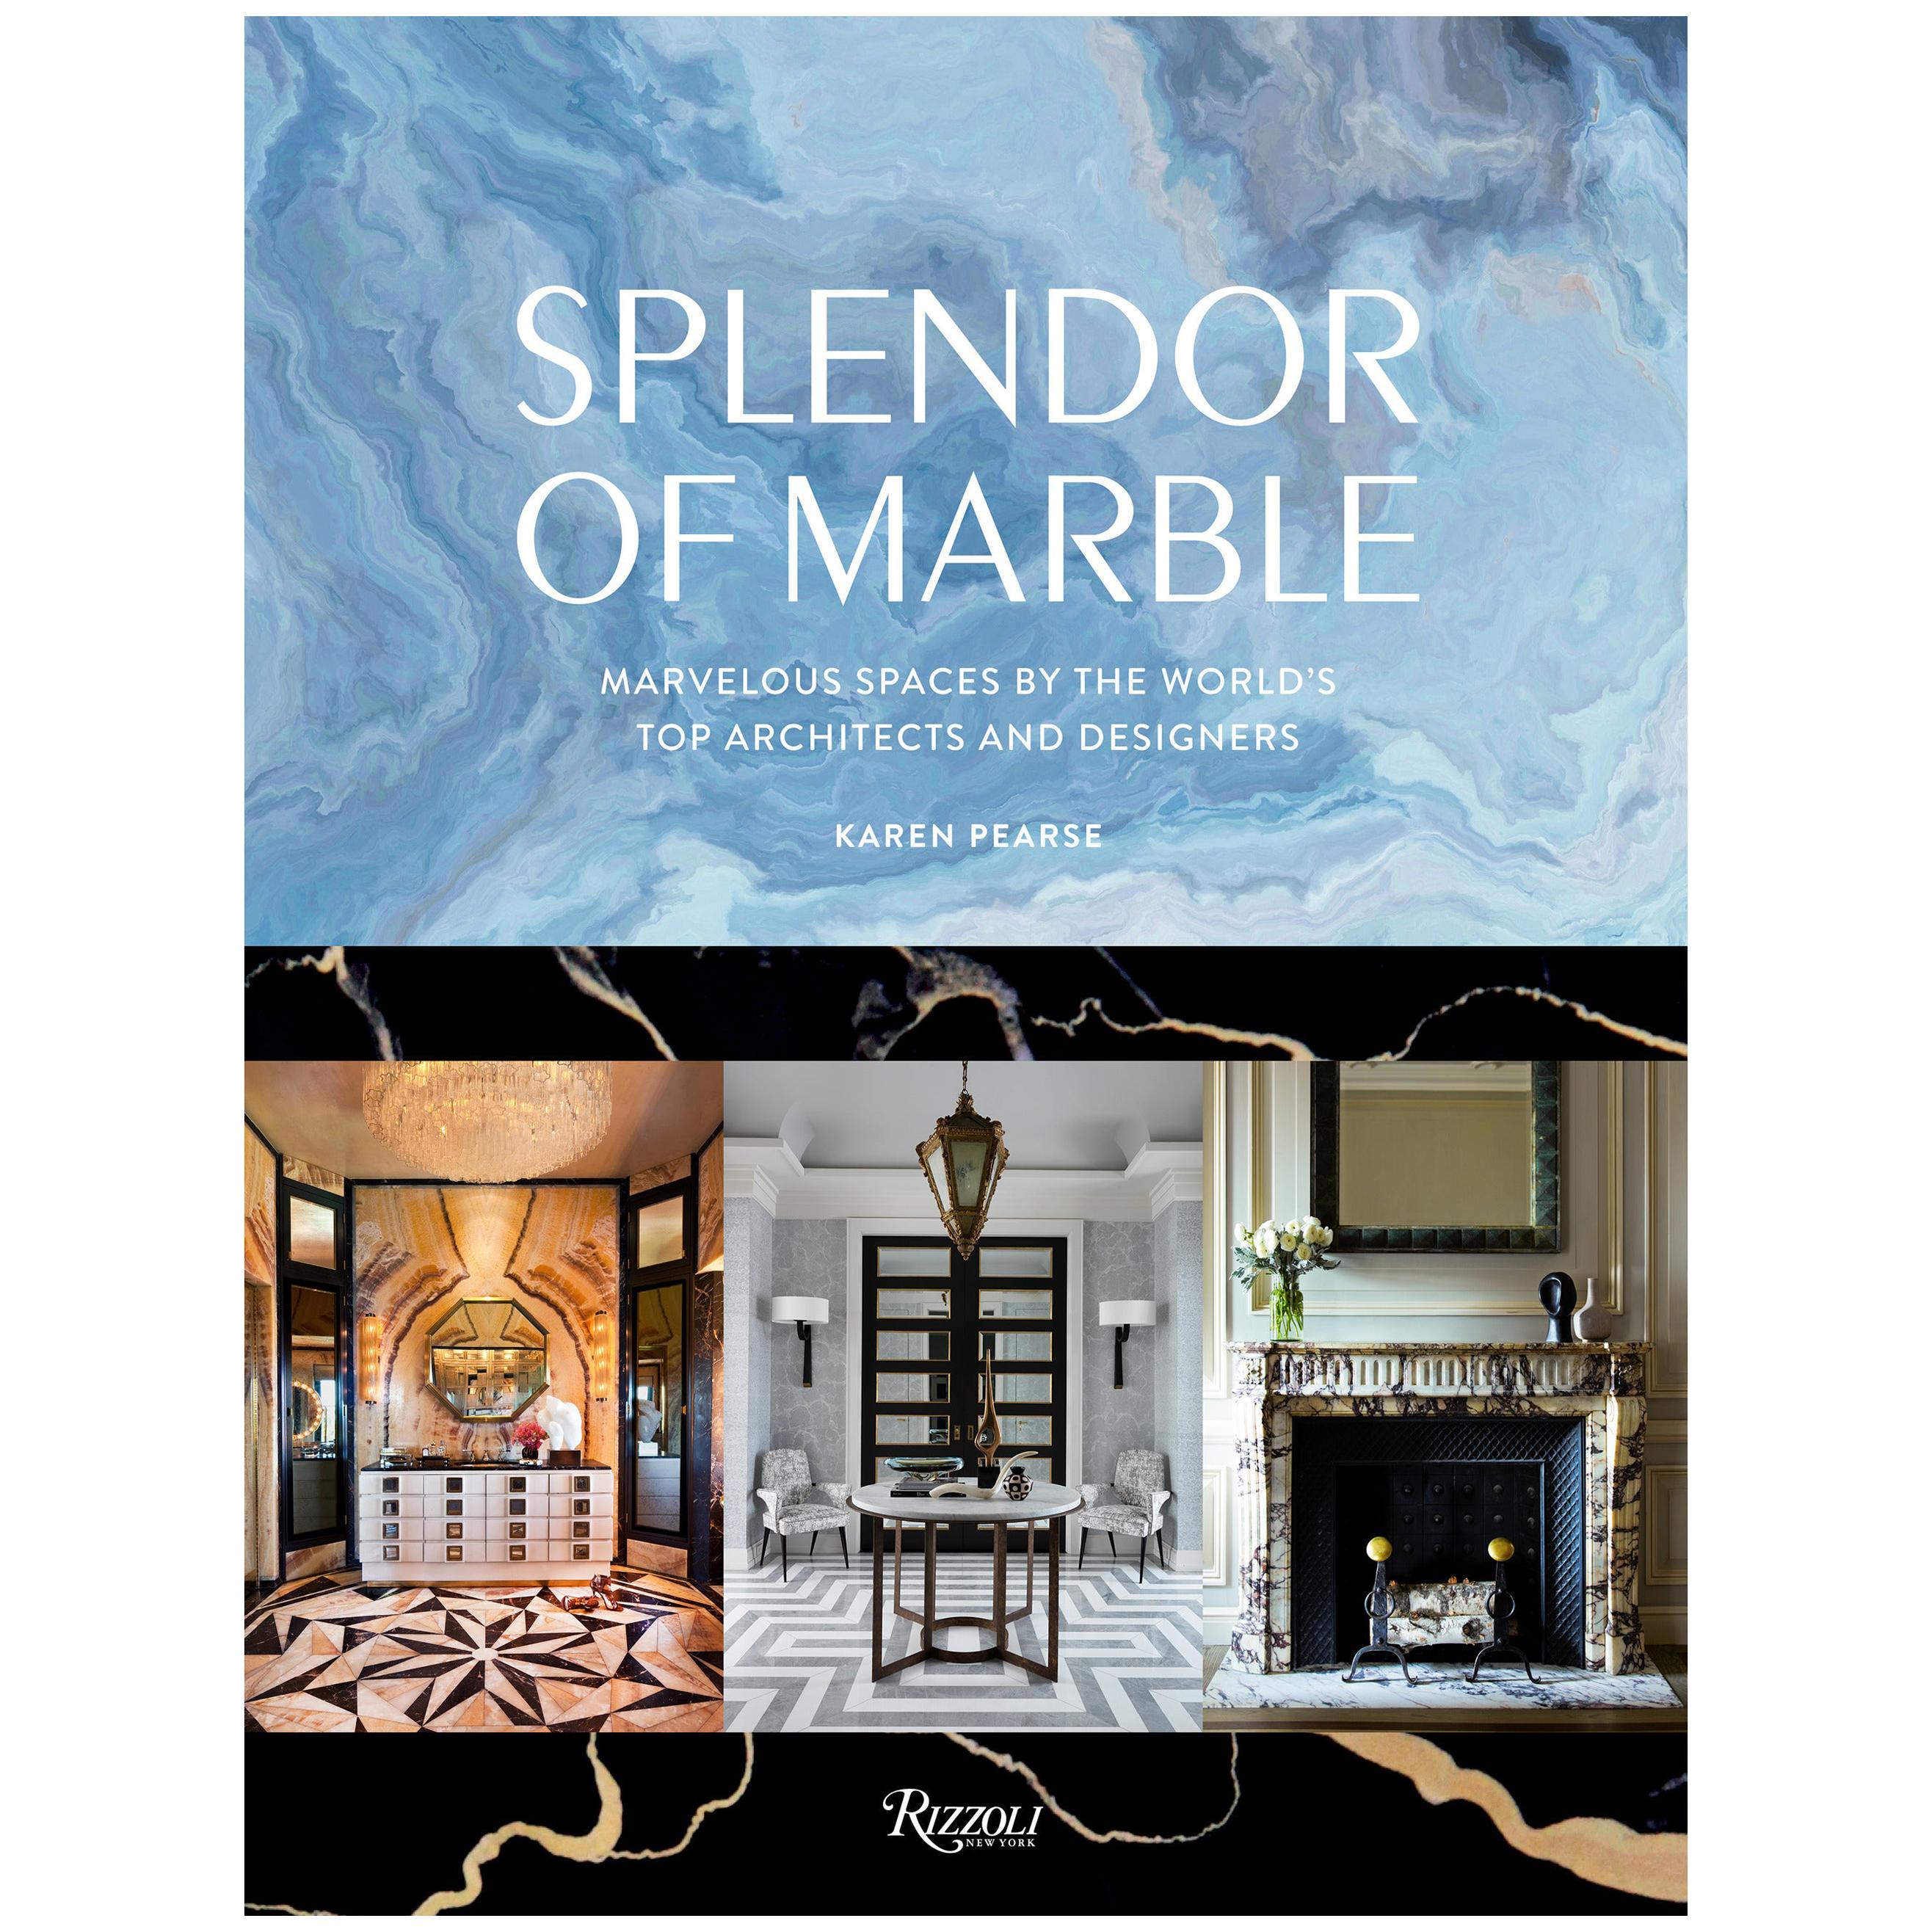 Splendor of Marble Marvelous Spaces by the Worlds Top Architects and Designers